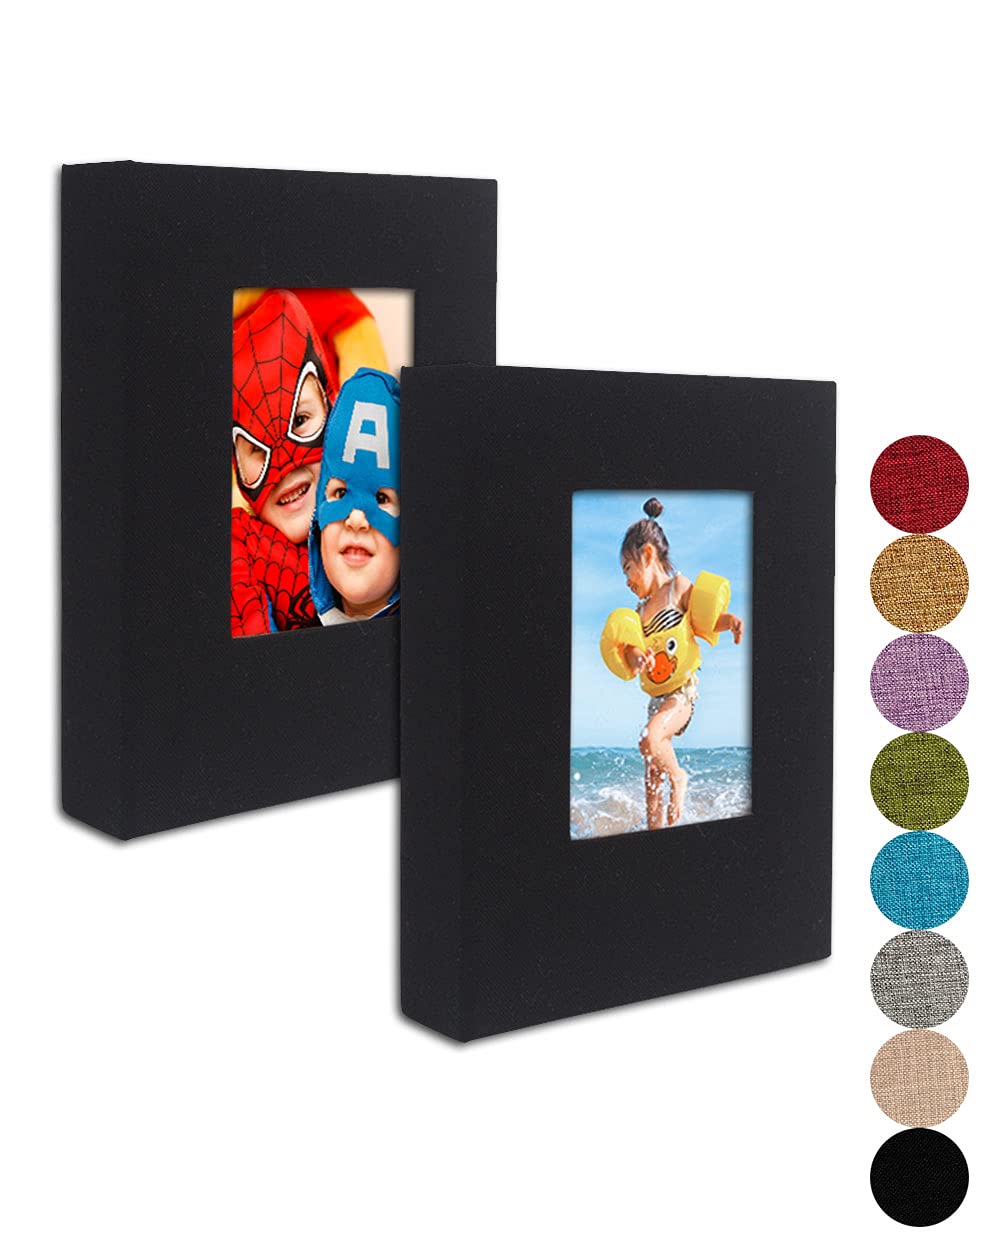 Small Photo Album 4x6 Photos, 2 Pack Linen Cover Mini Photo Book, 26-Page  Hol